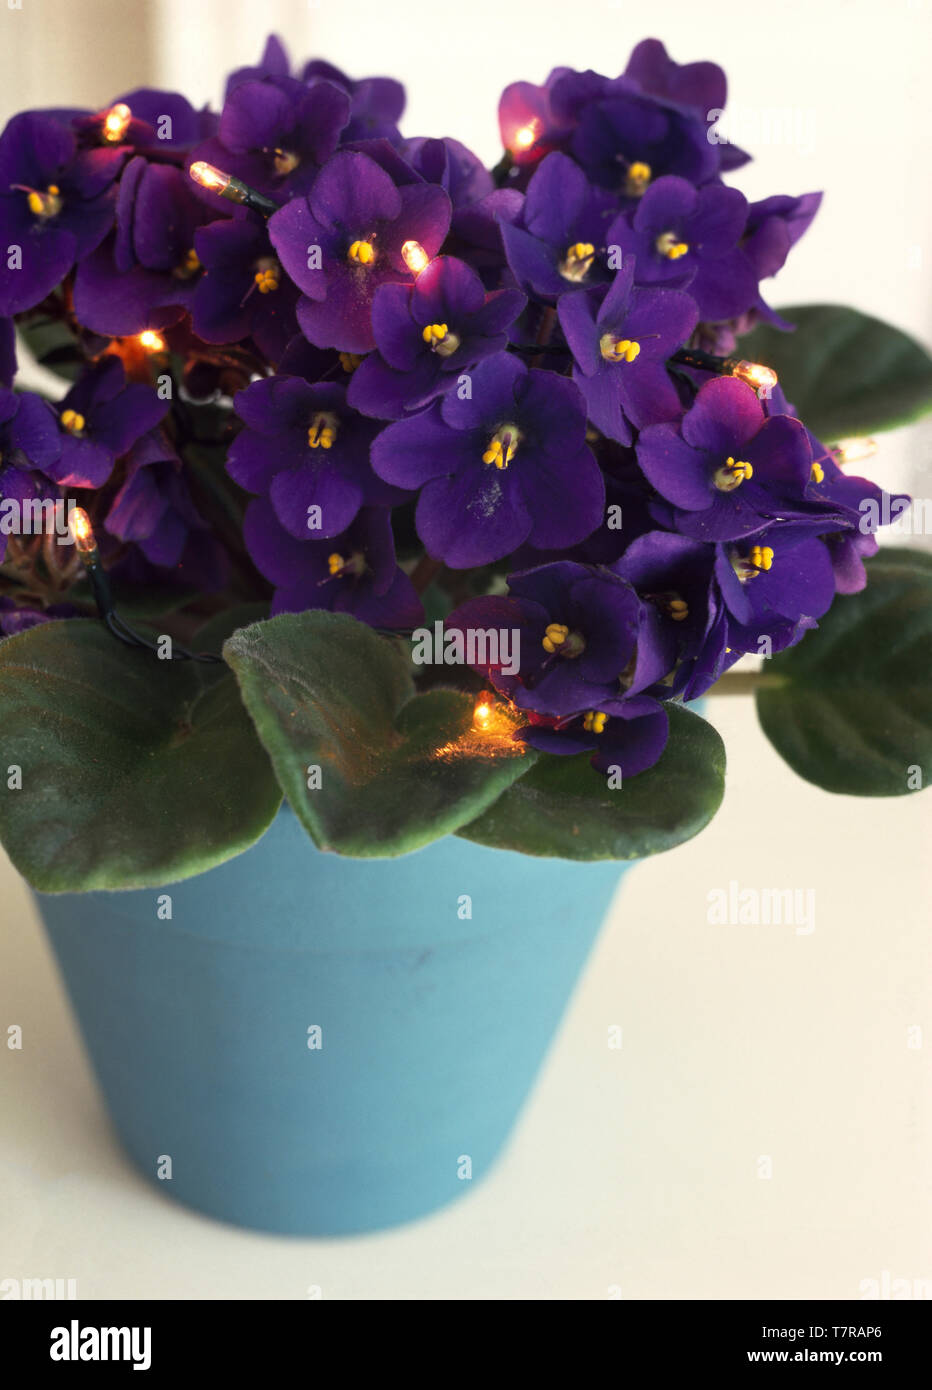 Purple African violets in turquoise painted pot Stock Photo